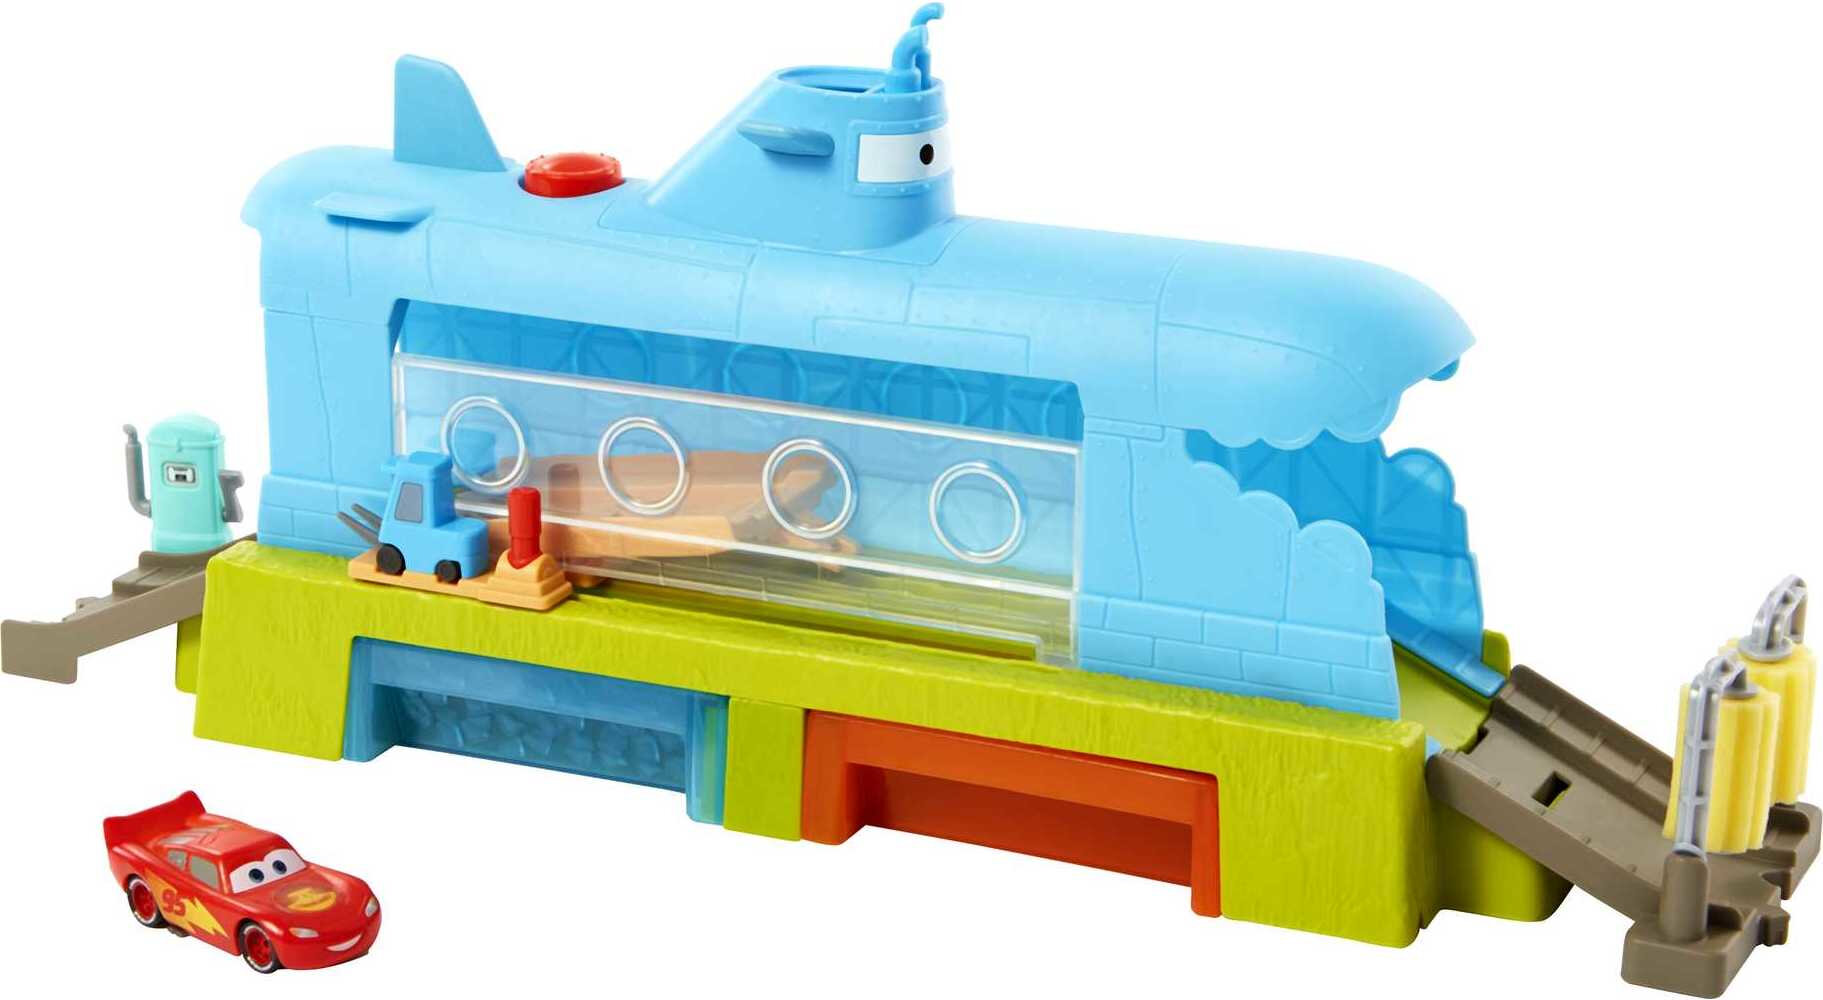 Disney Pixar Cars Submarine Car Wash Playset with Color-Change Lightning McQueen Toy Car - image 1 of 7